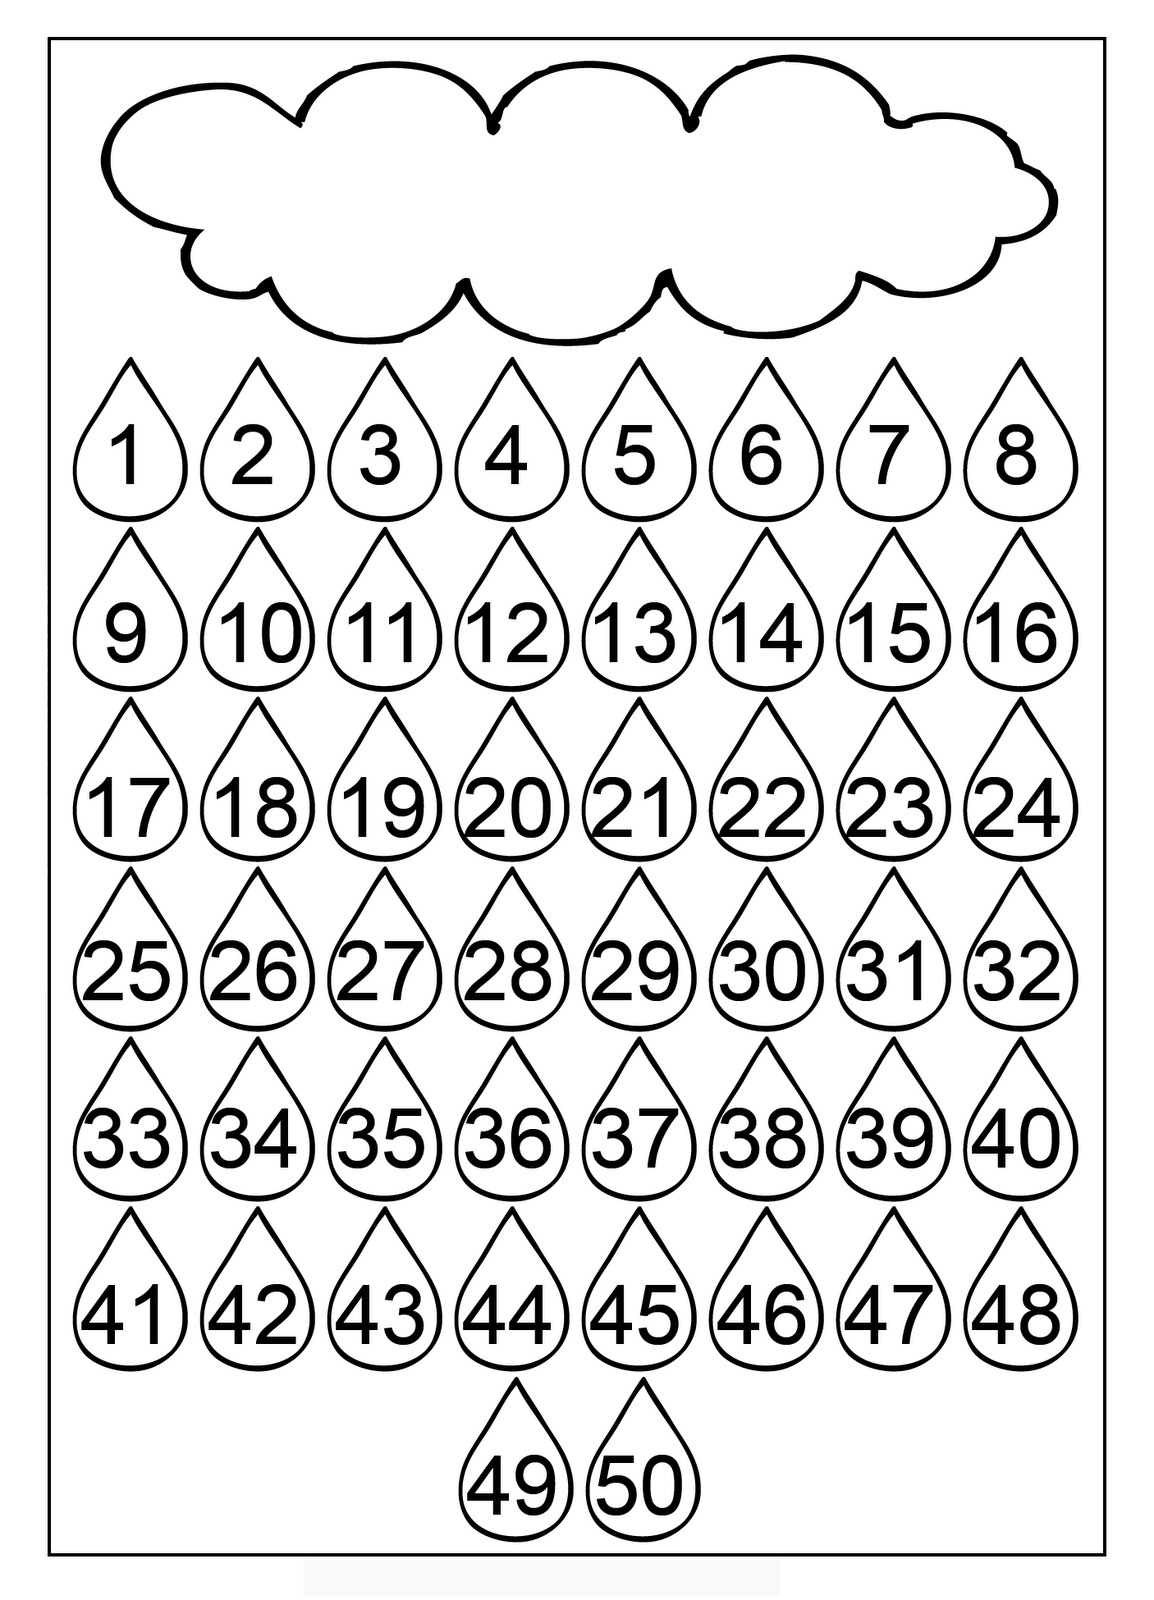 number chart 1-50 for kids